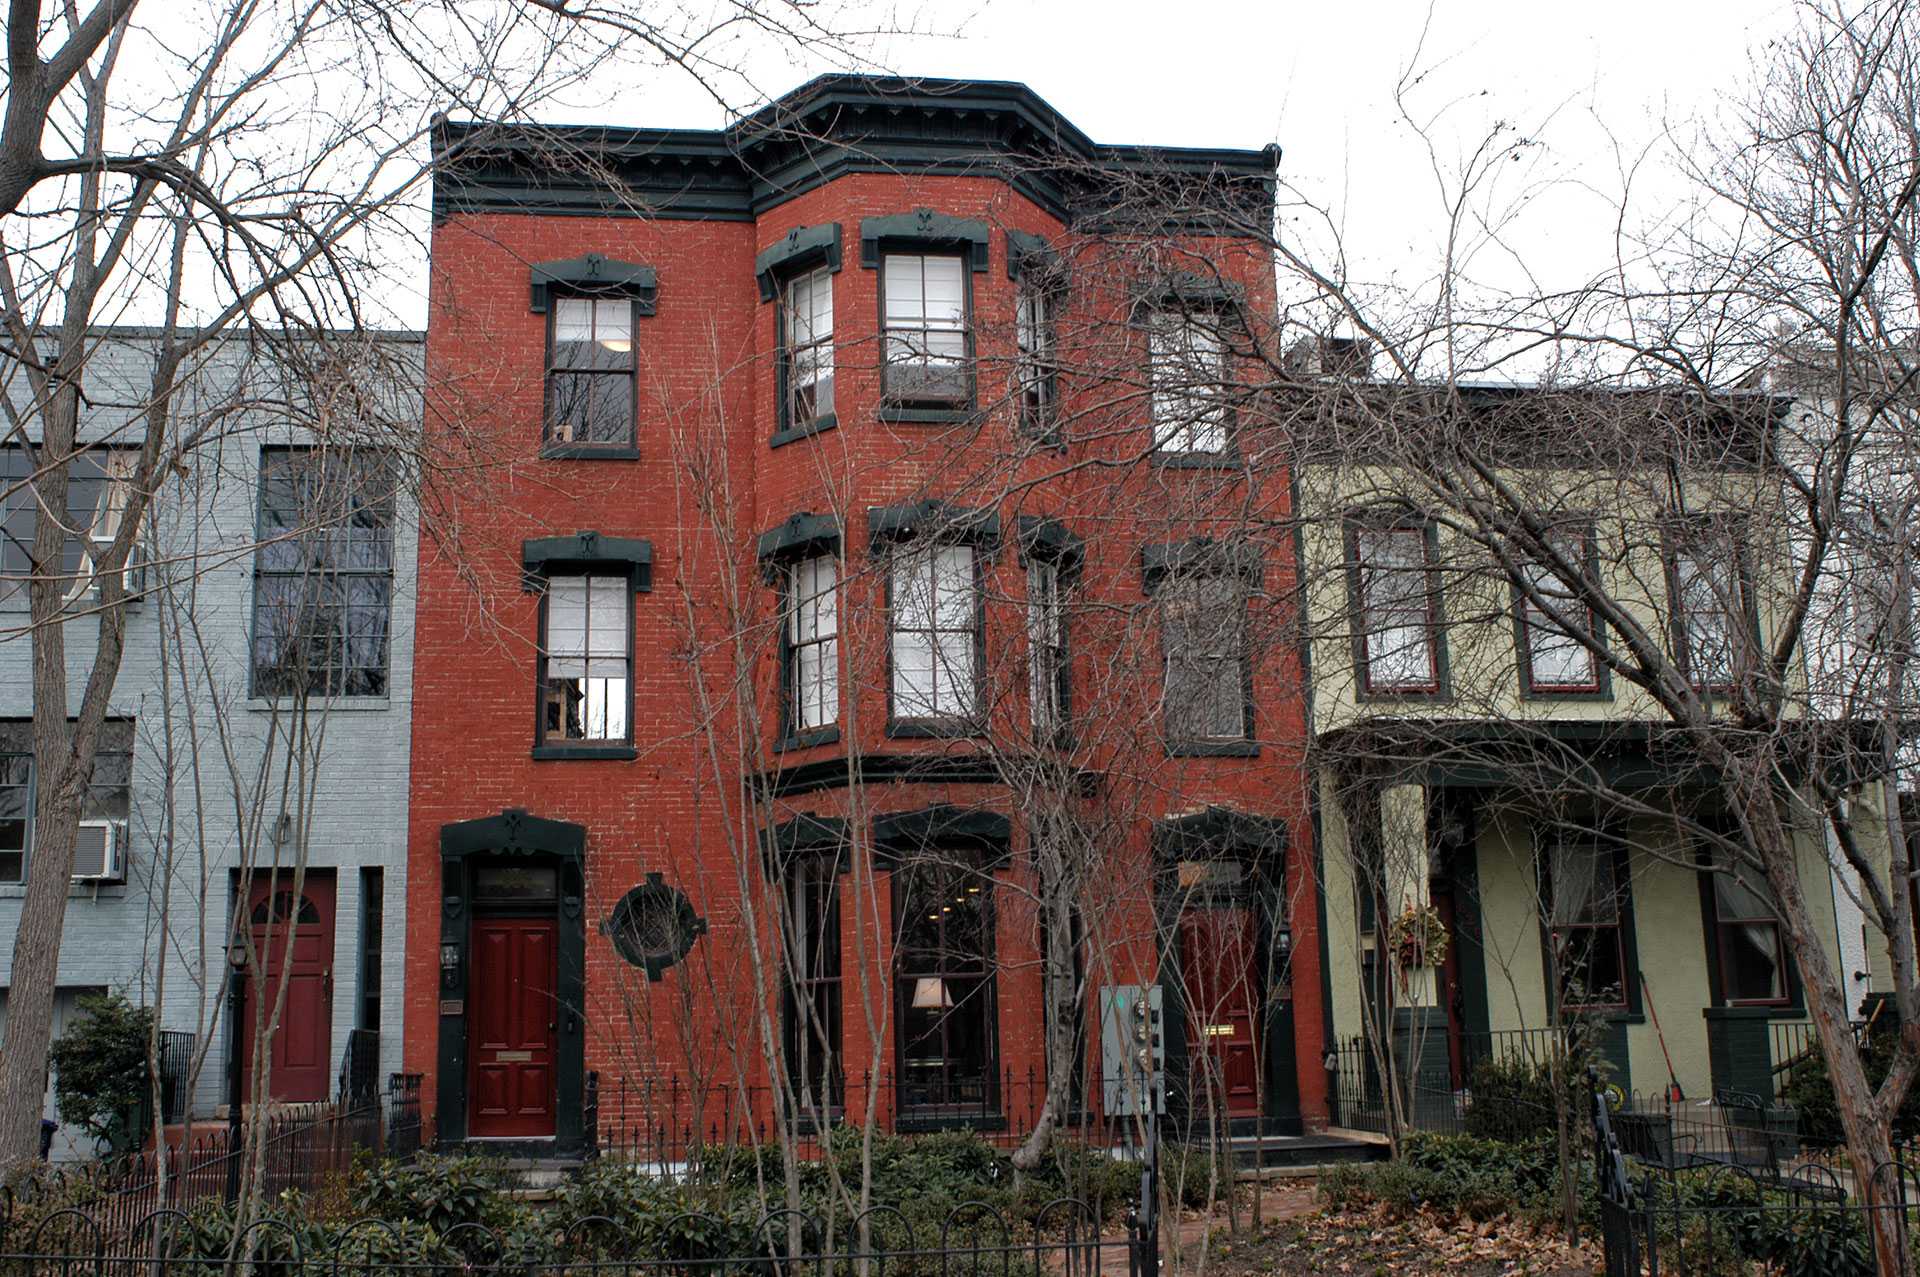 Appalachian to sell DC House